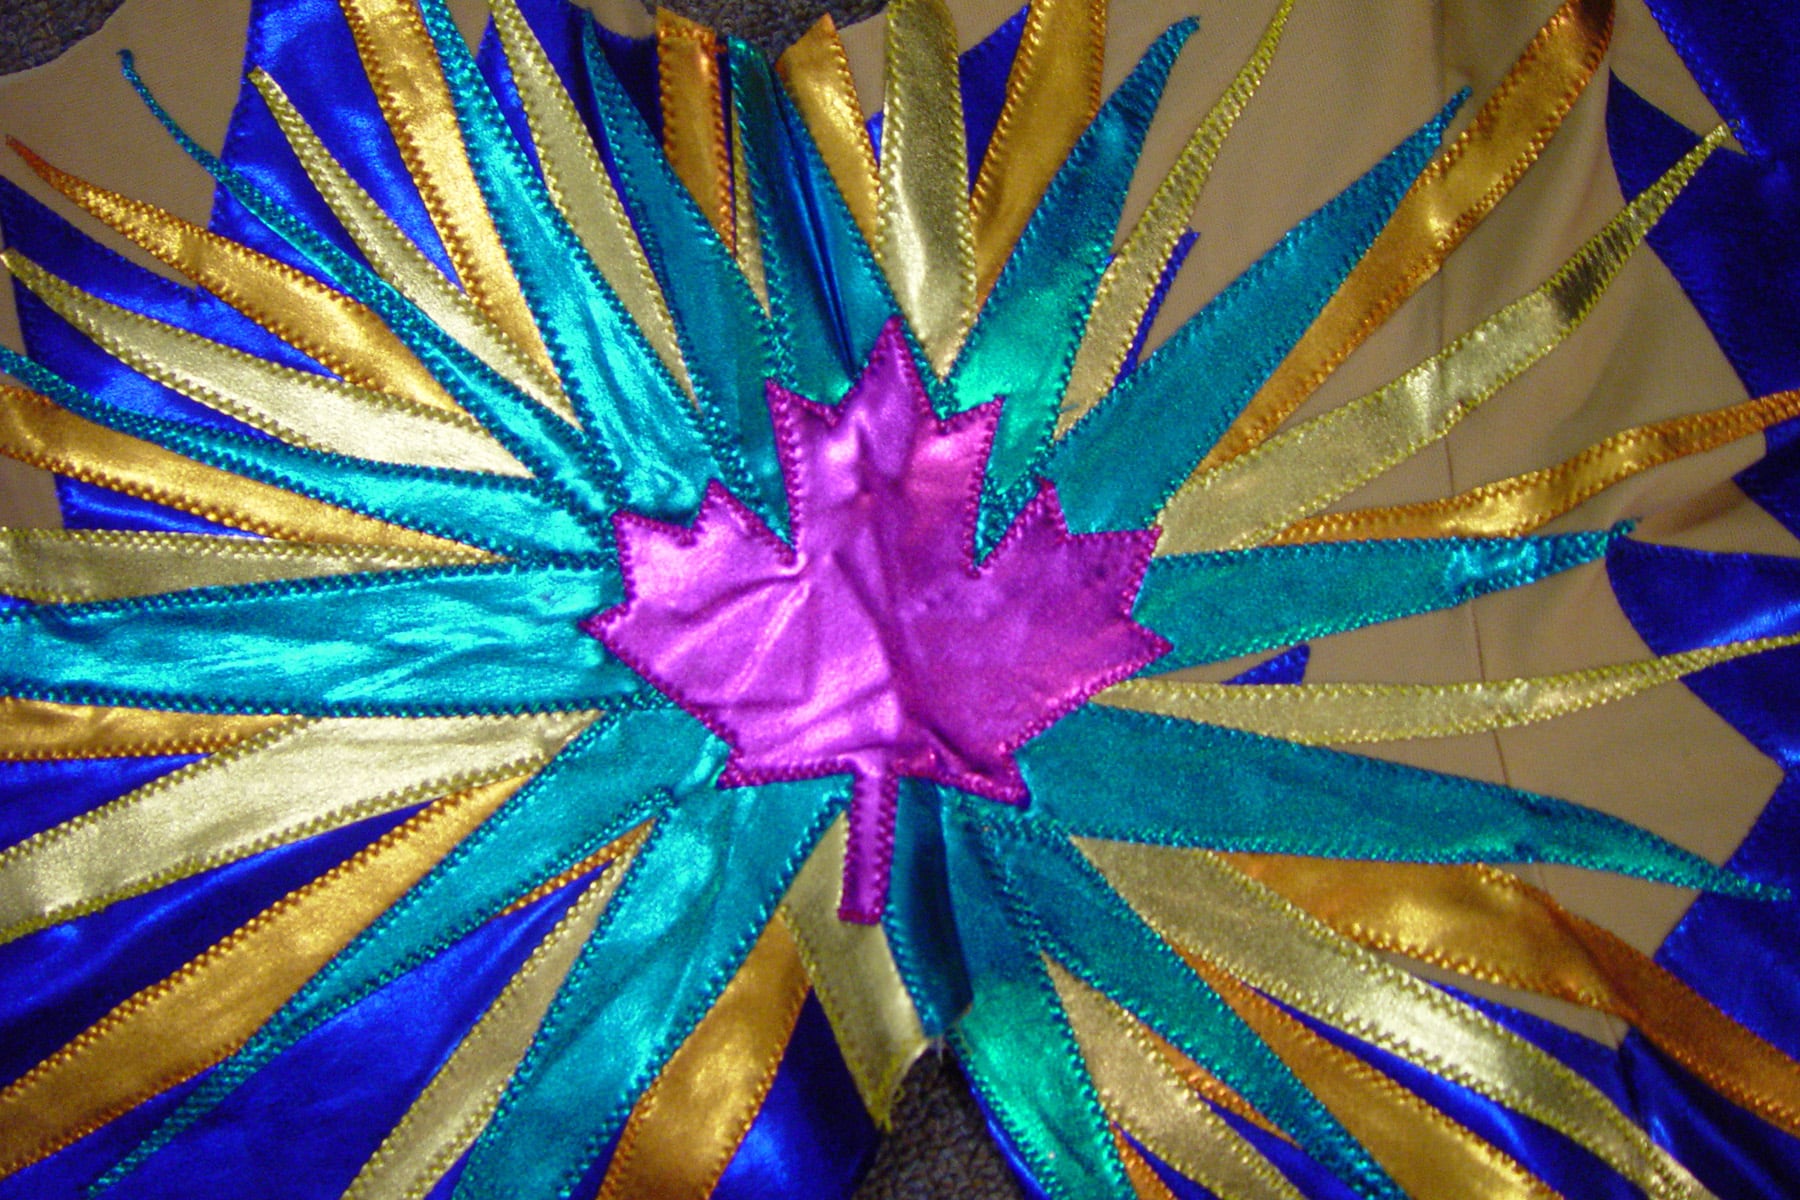 A close up view of intricately appliqued spandex. Shiny foil lycra makes a starburst design, coming out from behind a pink maple leaf.